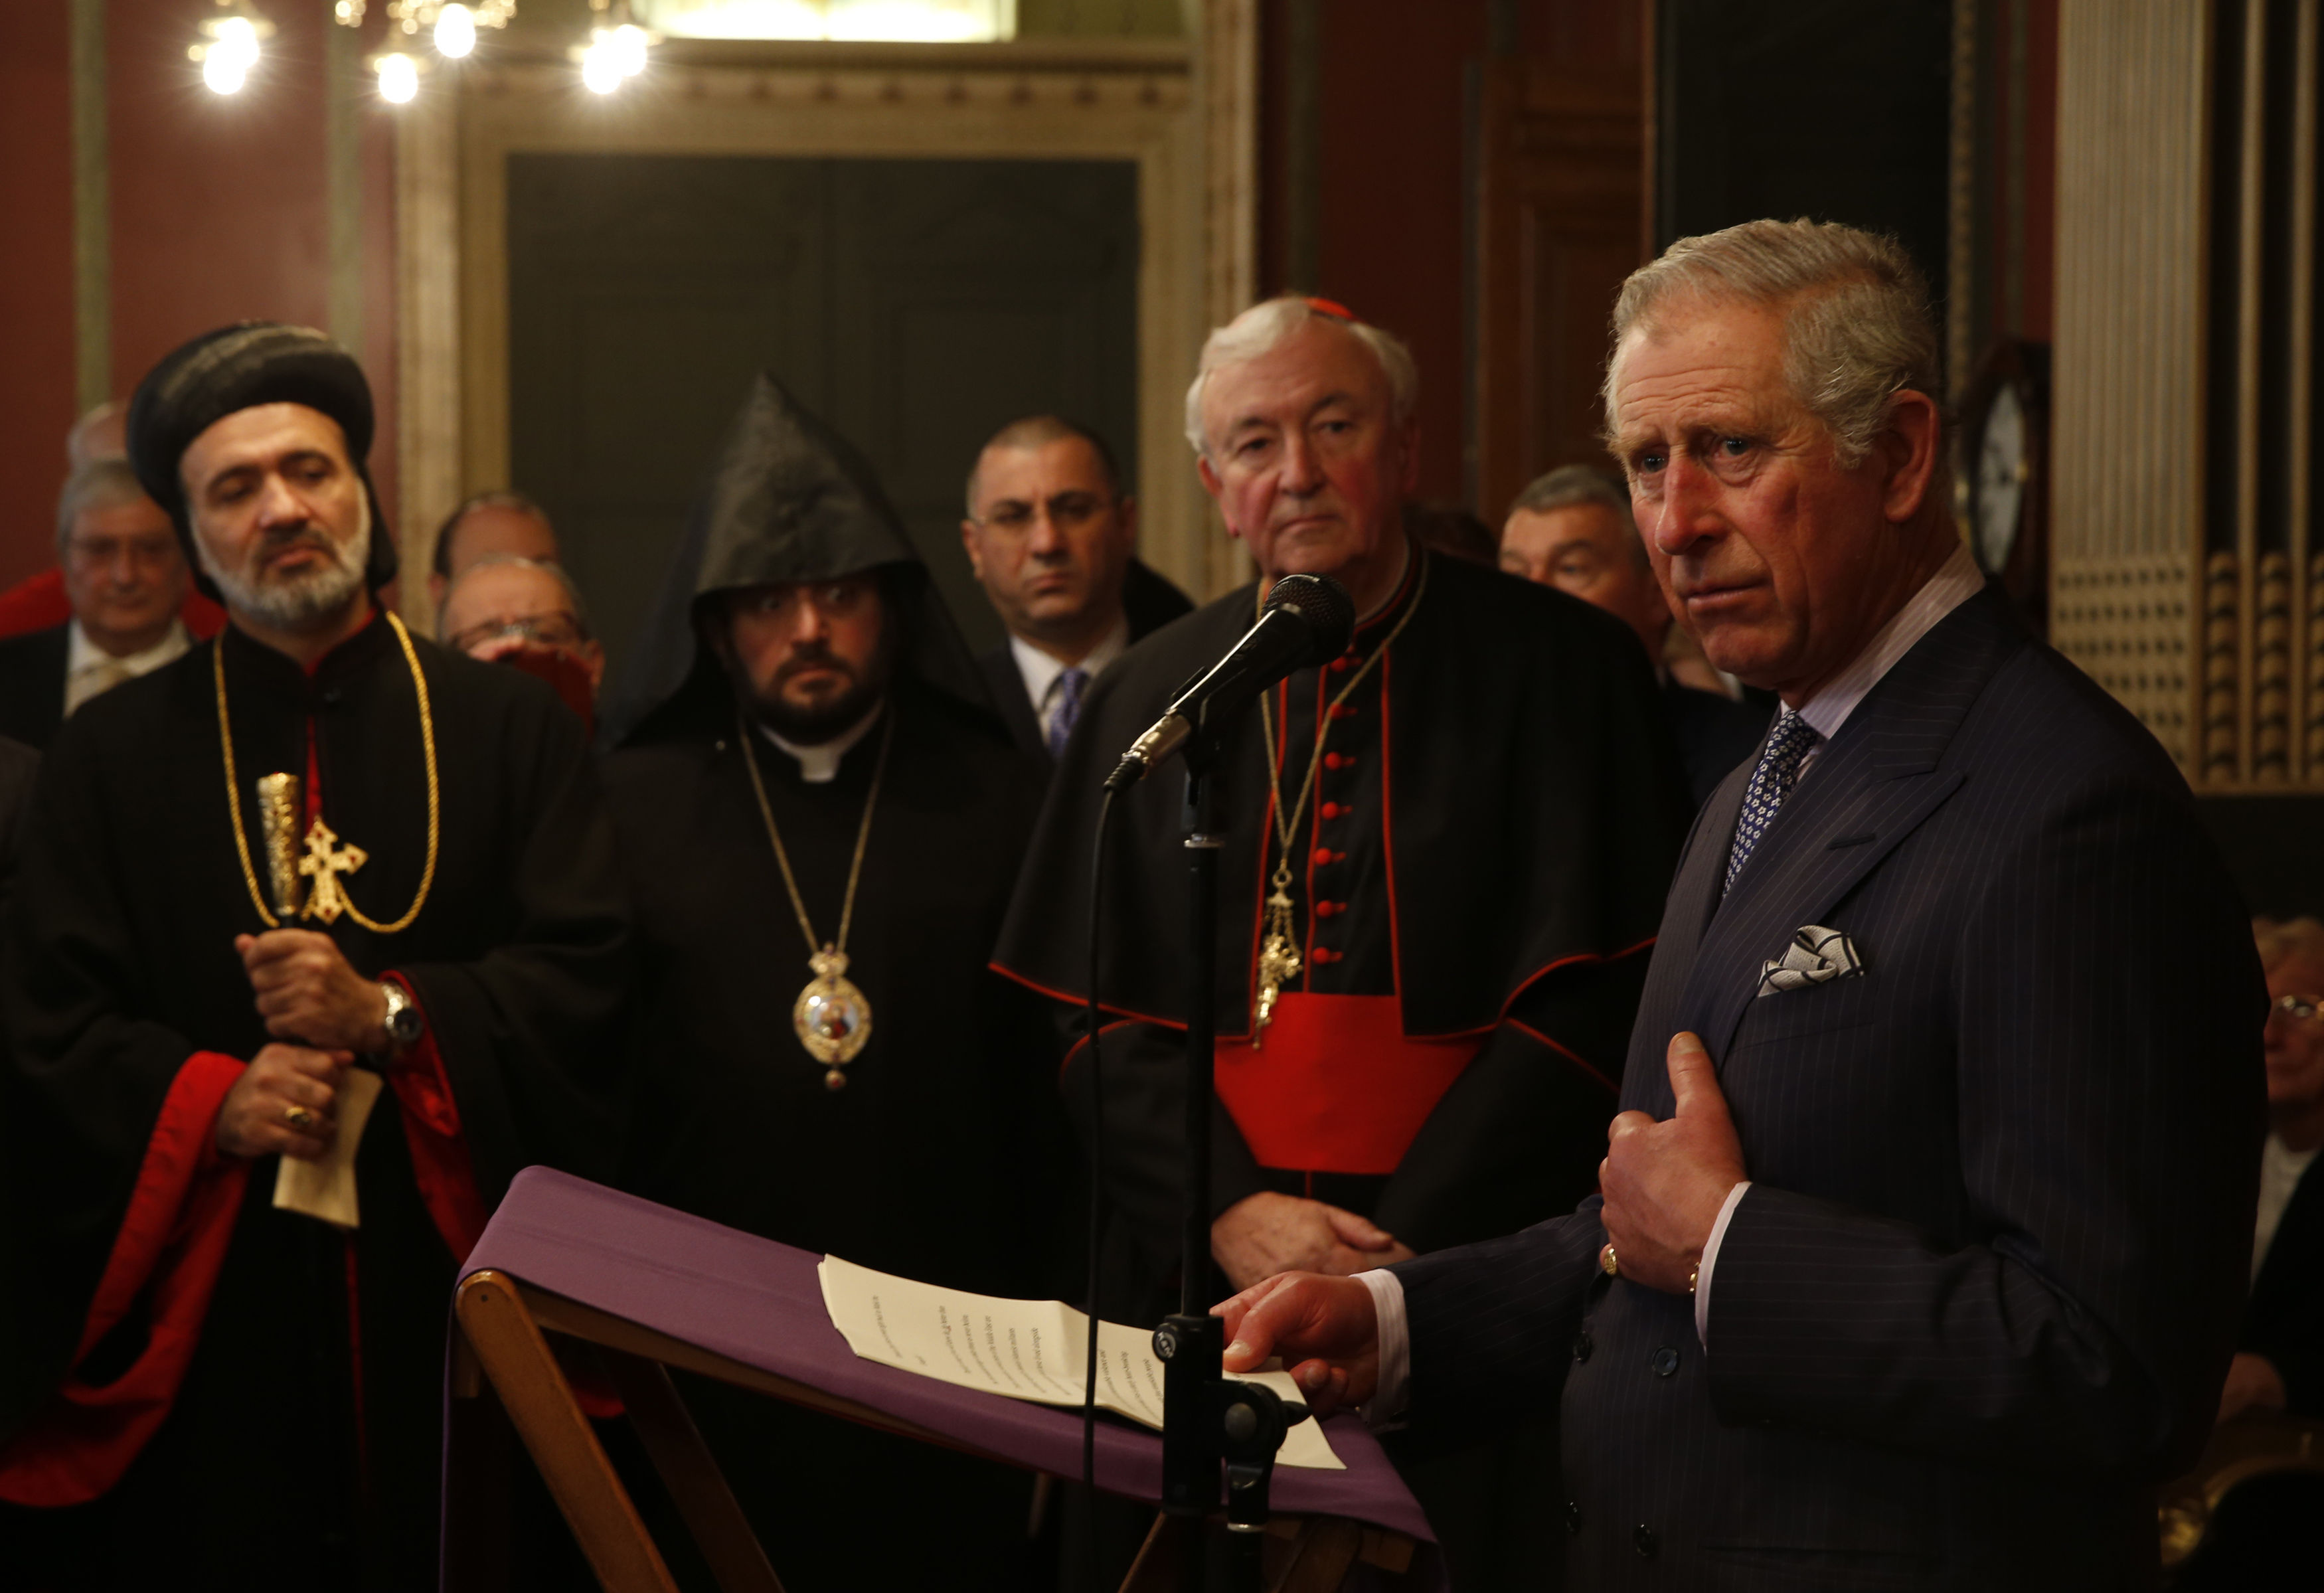 Good Friday: Prince of Wales supports persecuted Christians